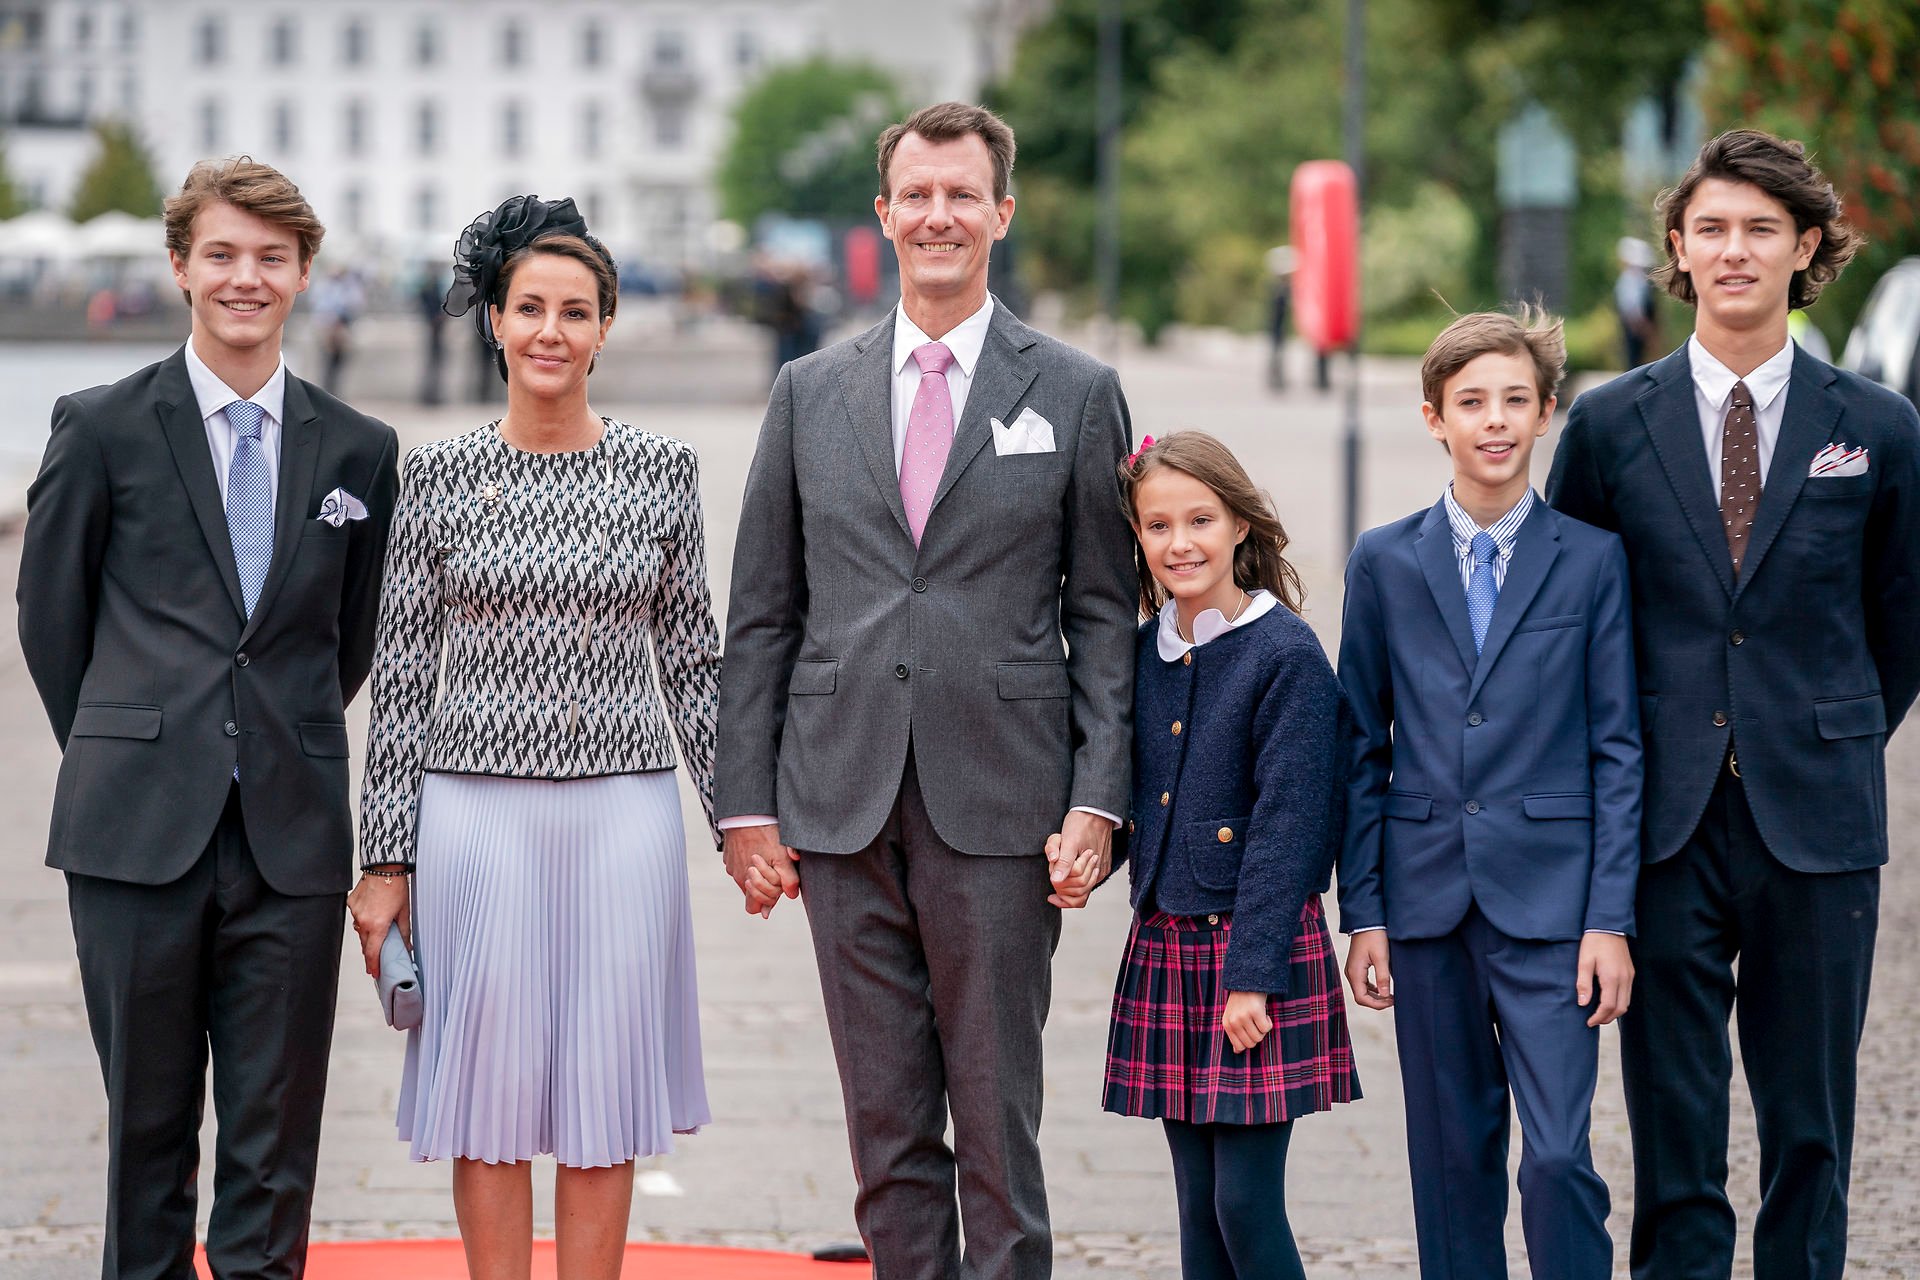 Danish Palace Removes Prince and Princess Titles from Queen’s Grandchildren